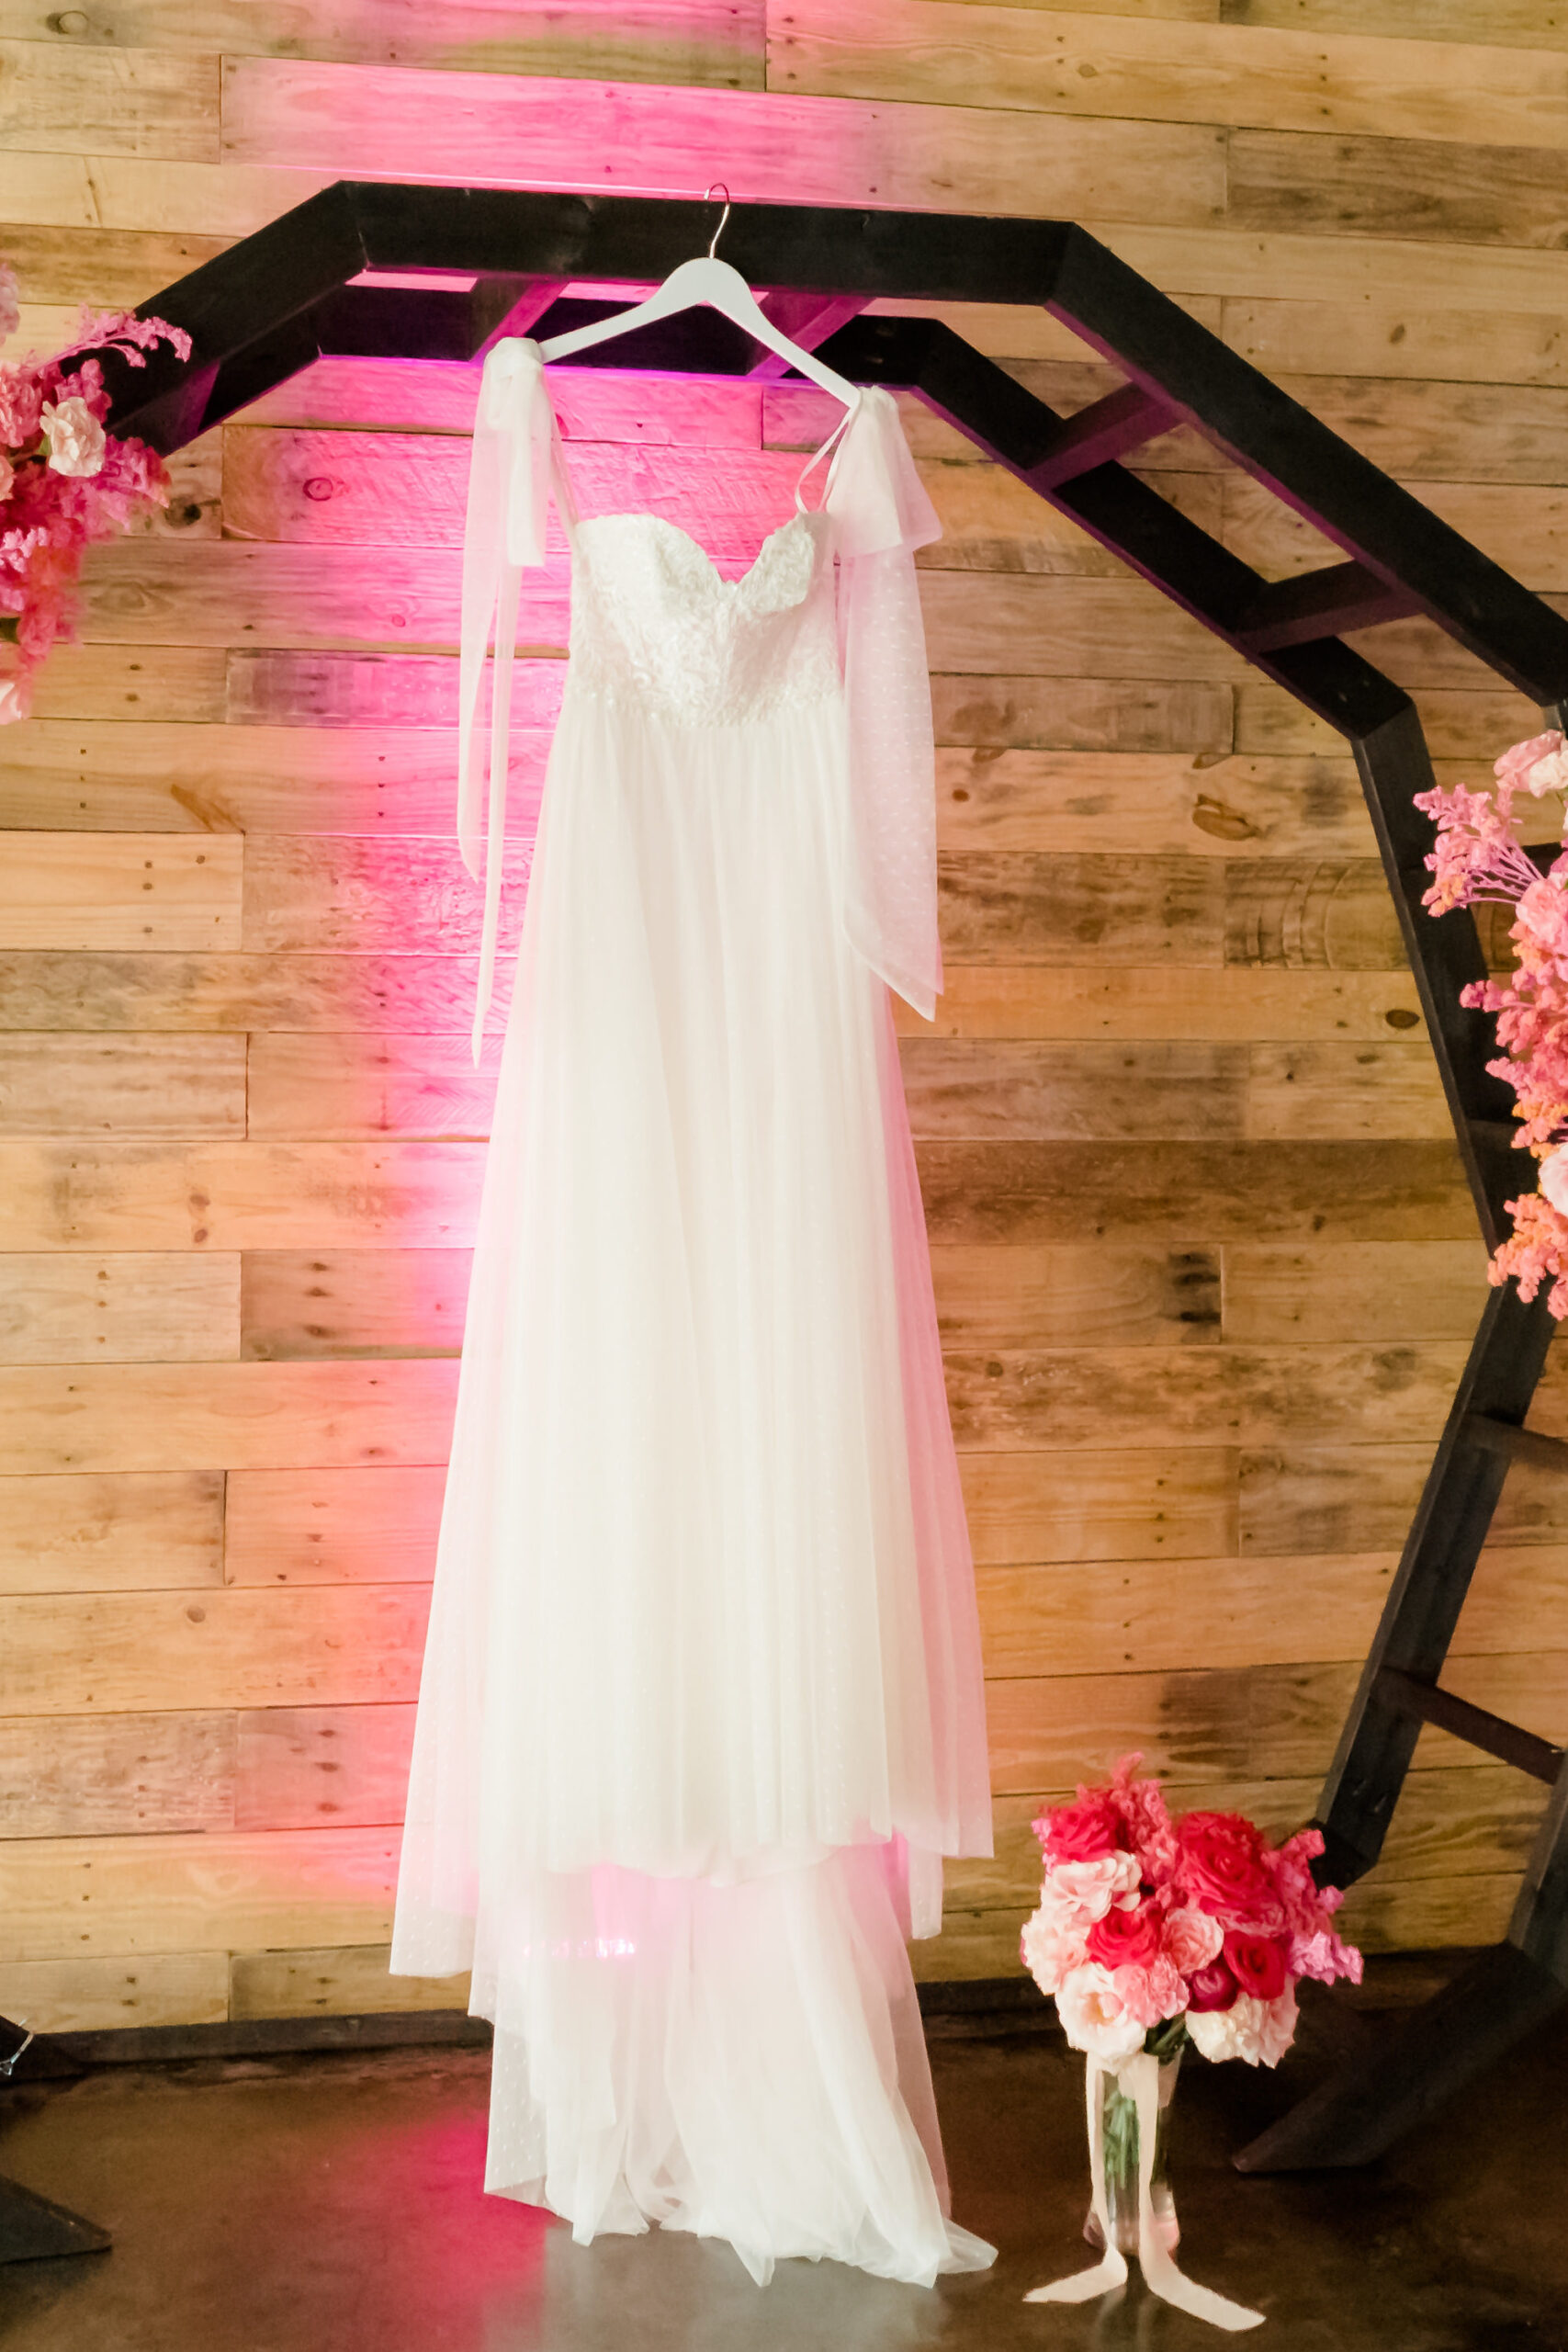 Whimsical Tulle Wedding dress Hanging on Geometric Black Arch with Pink Uplighting